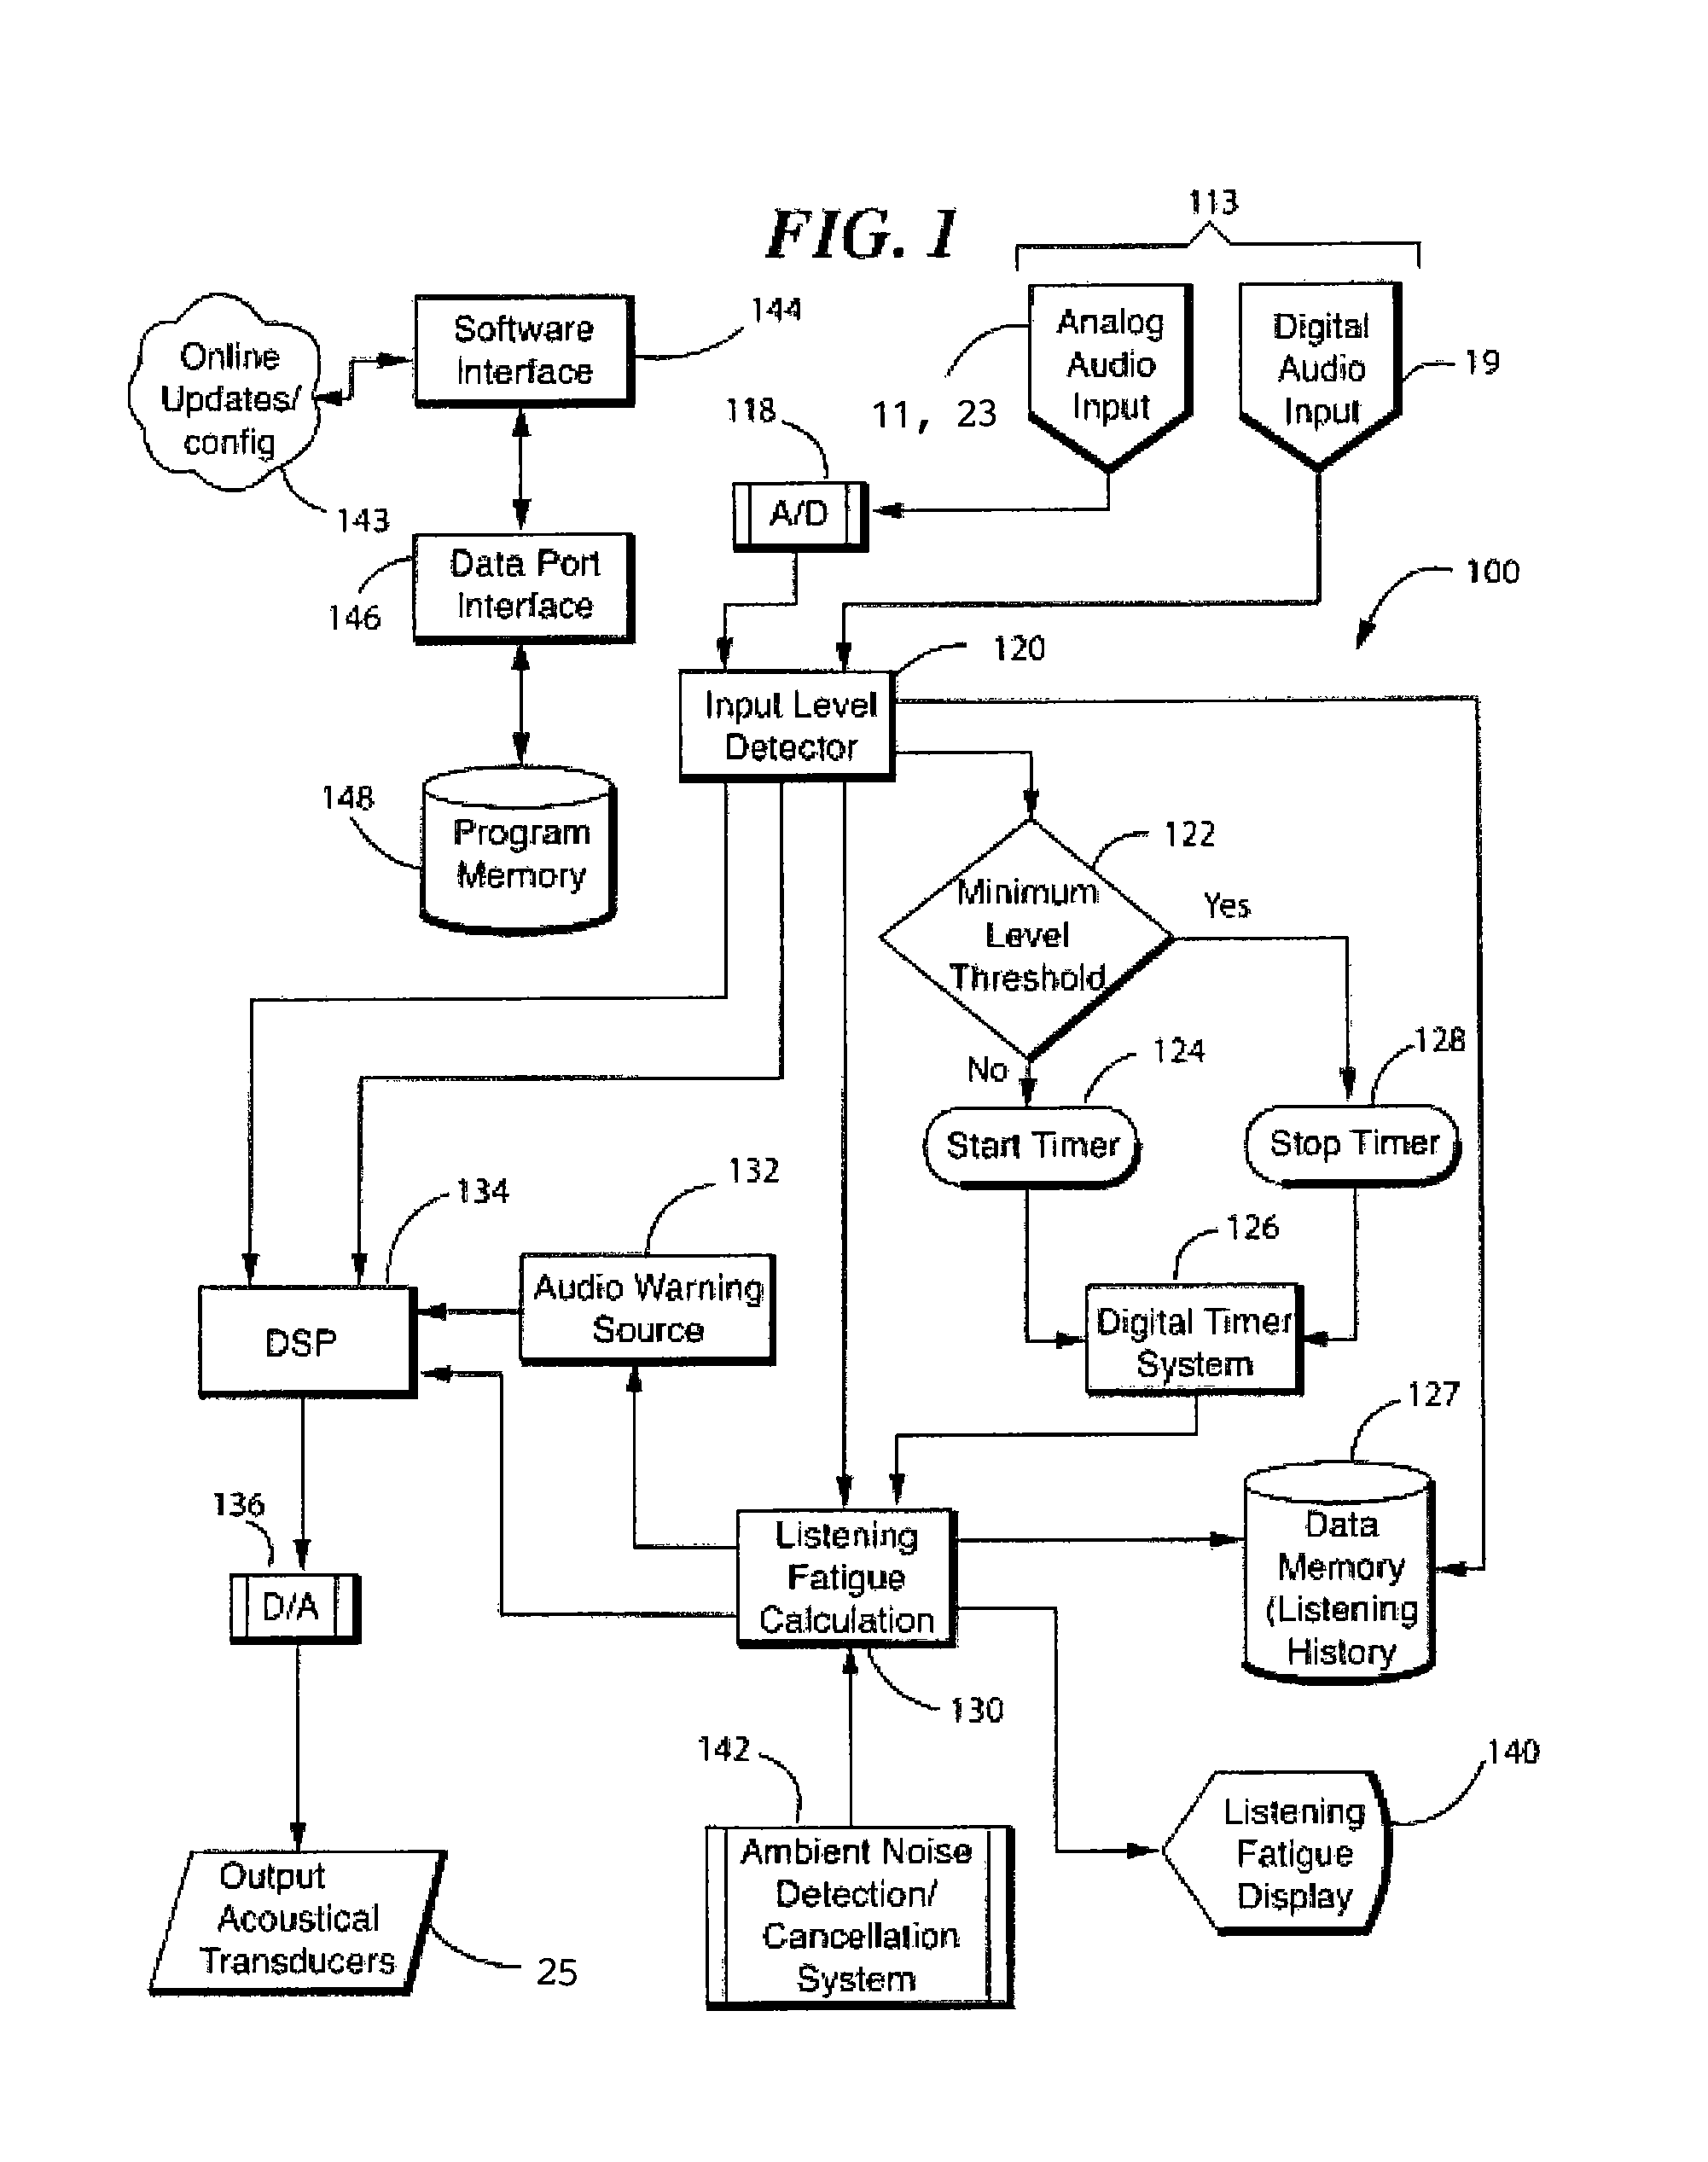 Sound pressure level monitoring and notification system